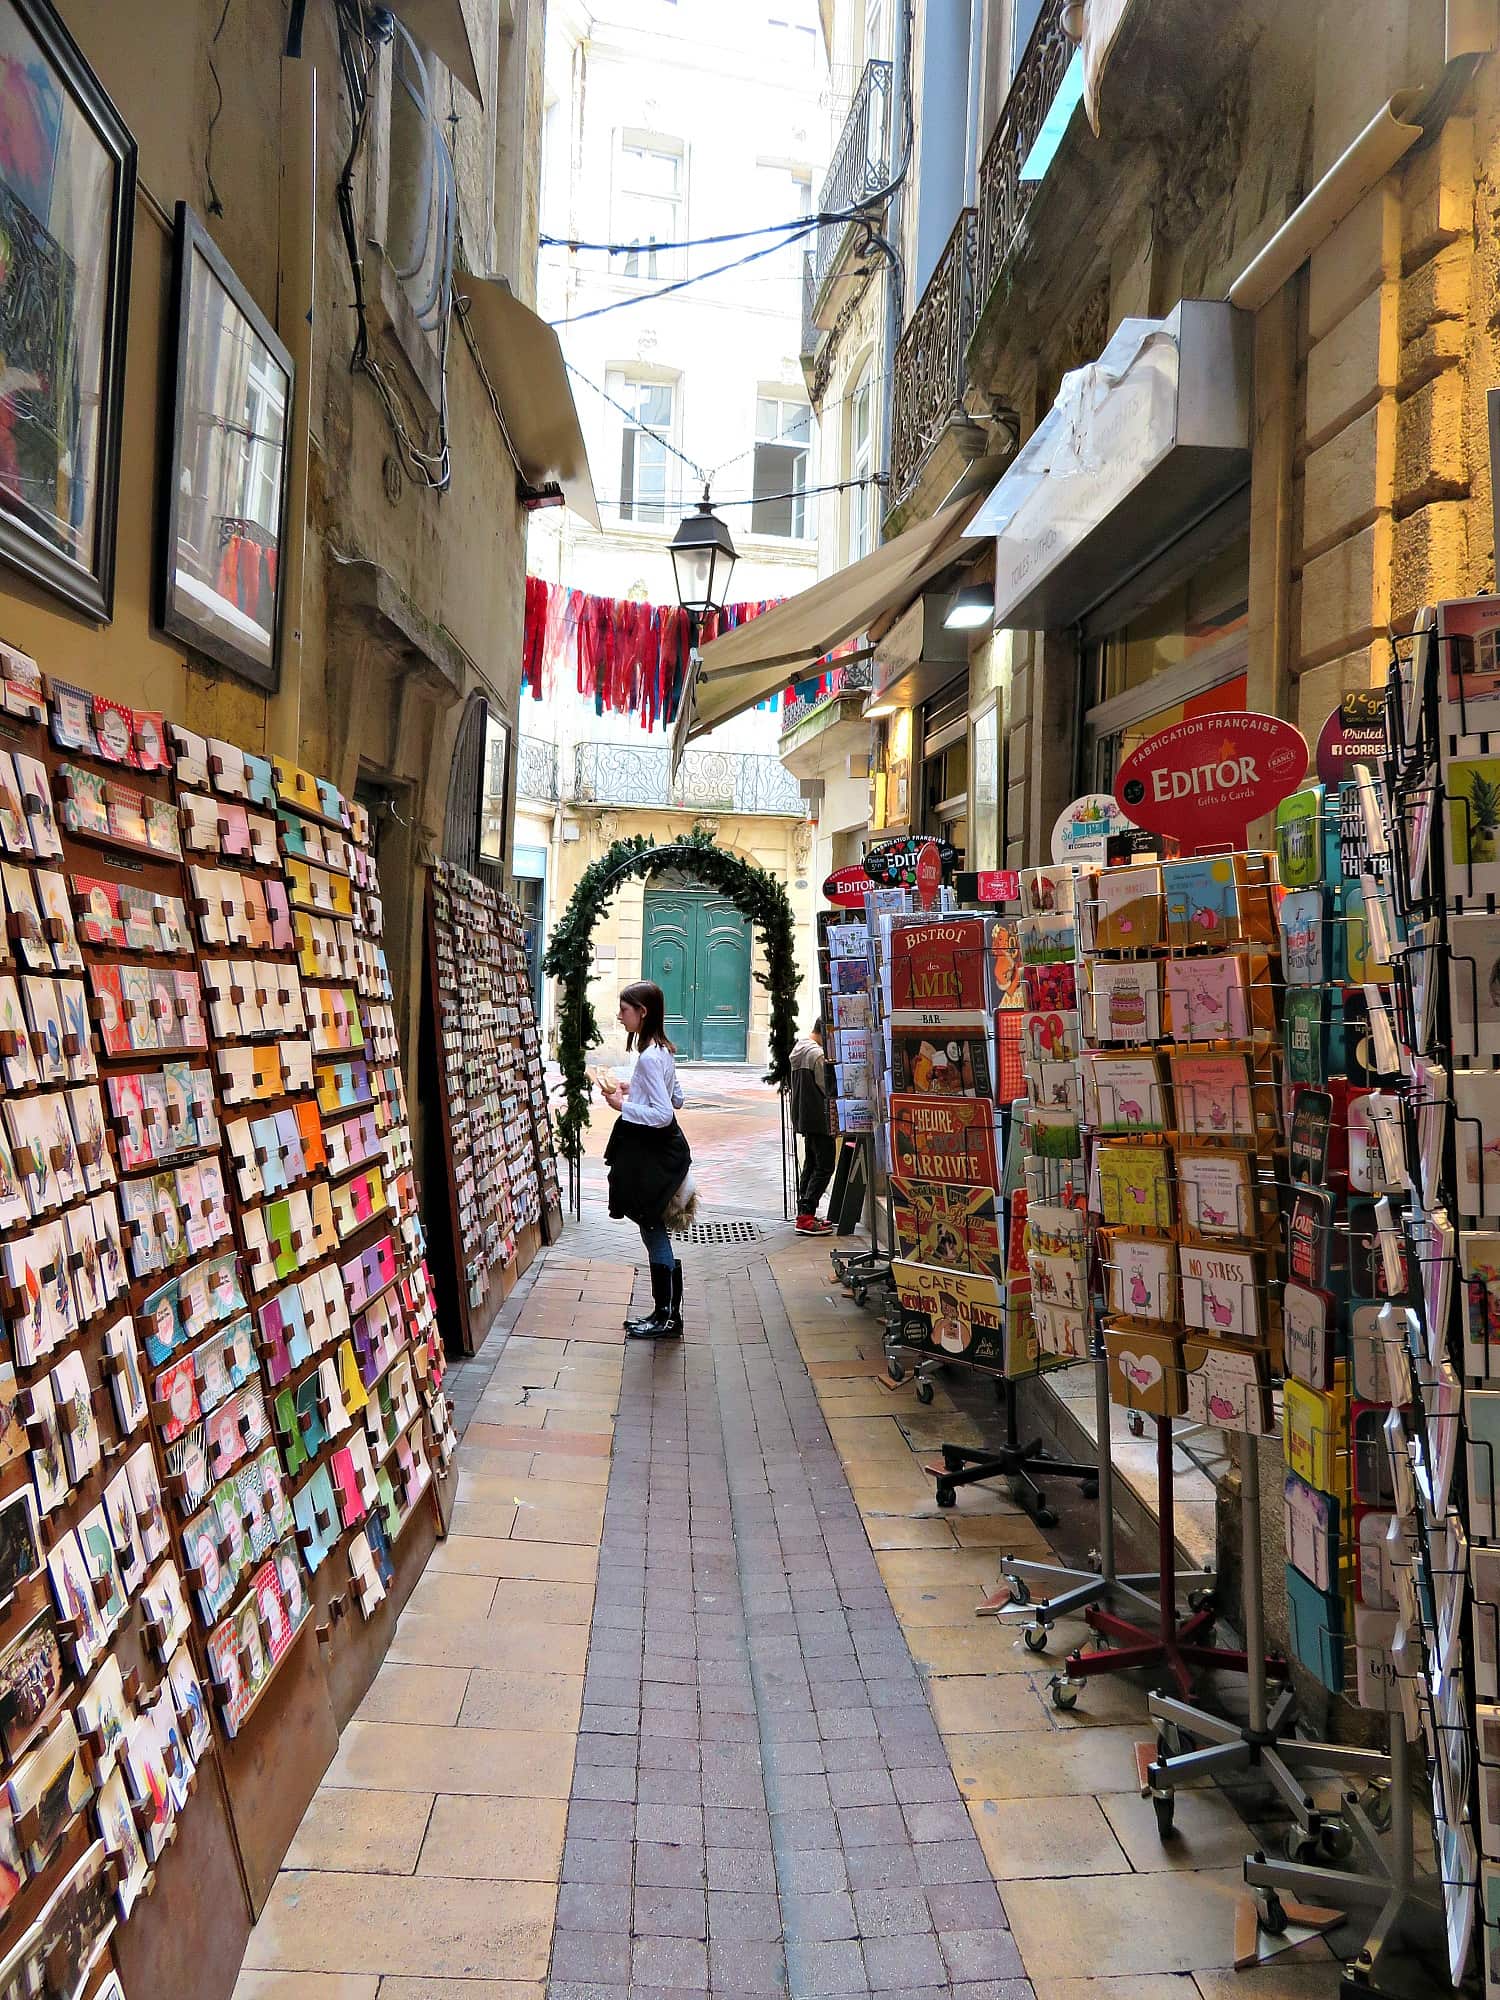 Post card shop in Montpellier, France